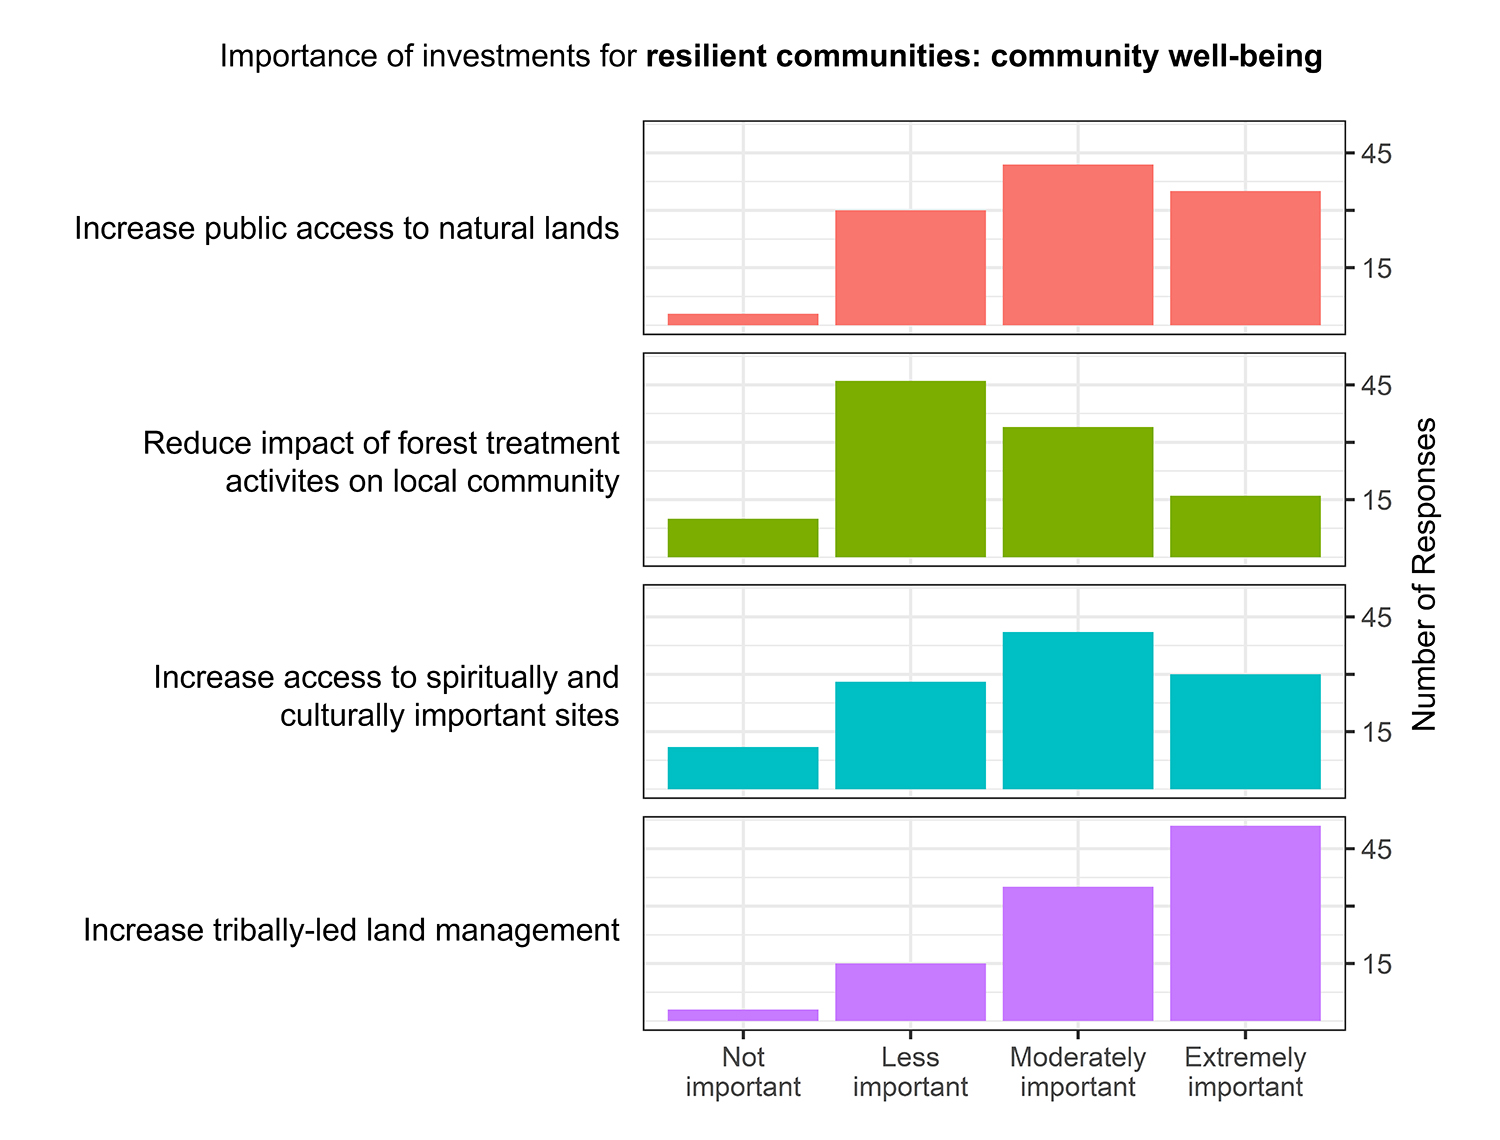 Histogram of Importance of Investments for Resilient Communities: Community Well-Being